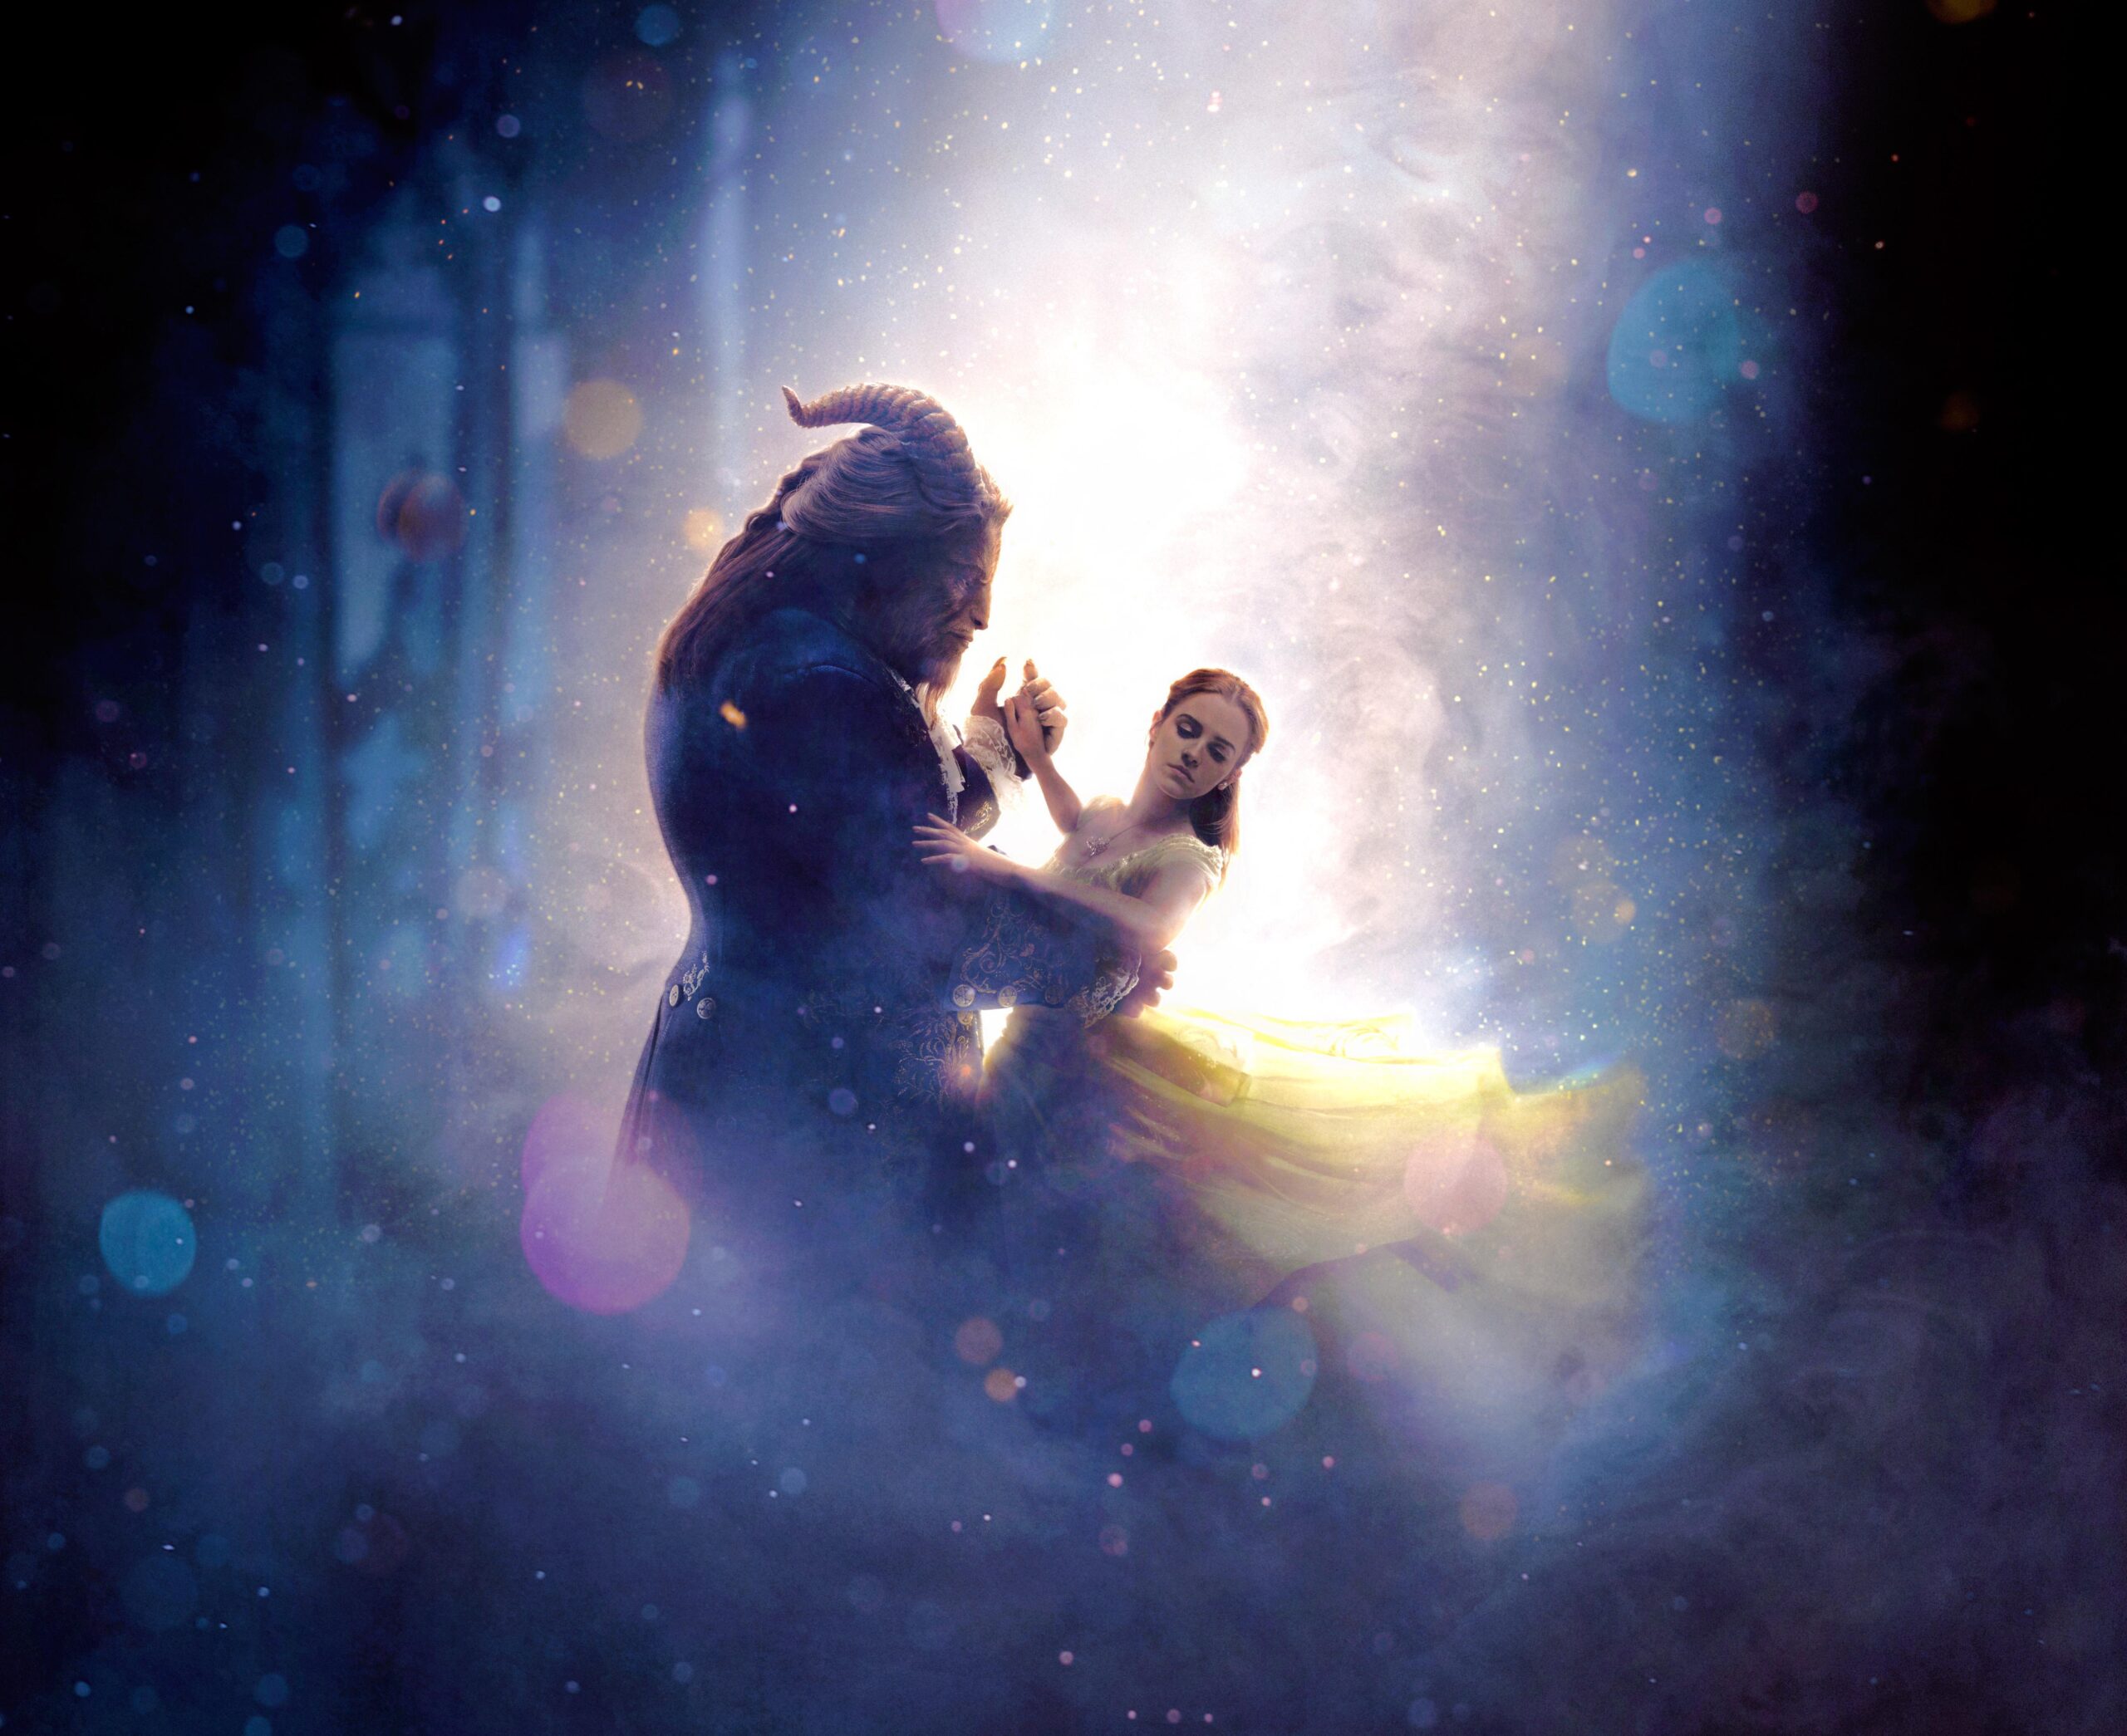 Beauty And The Beast Hd Wallpaper 4k Download Full Screen